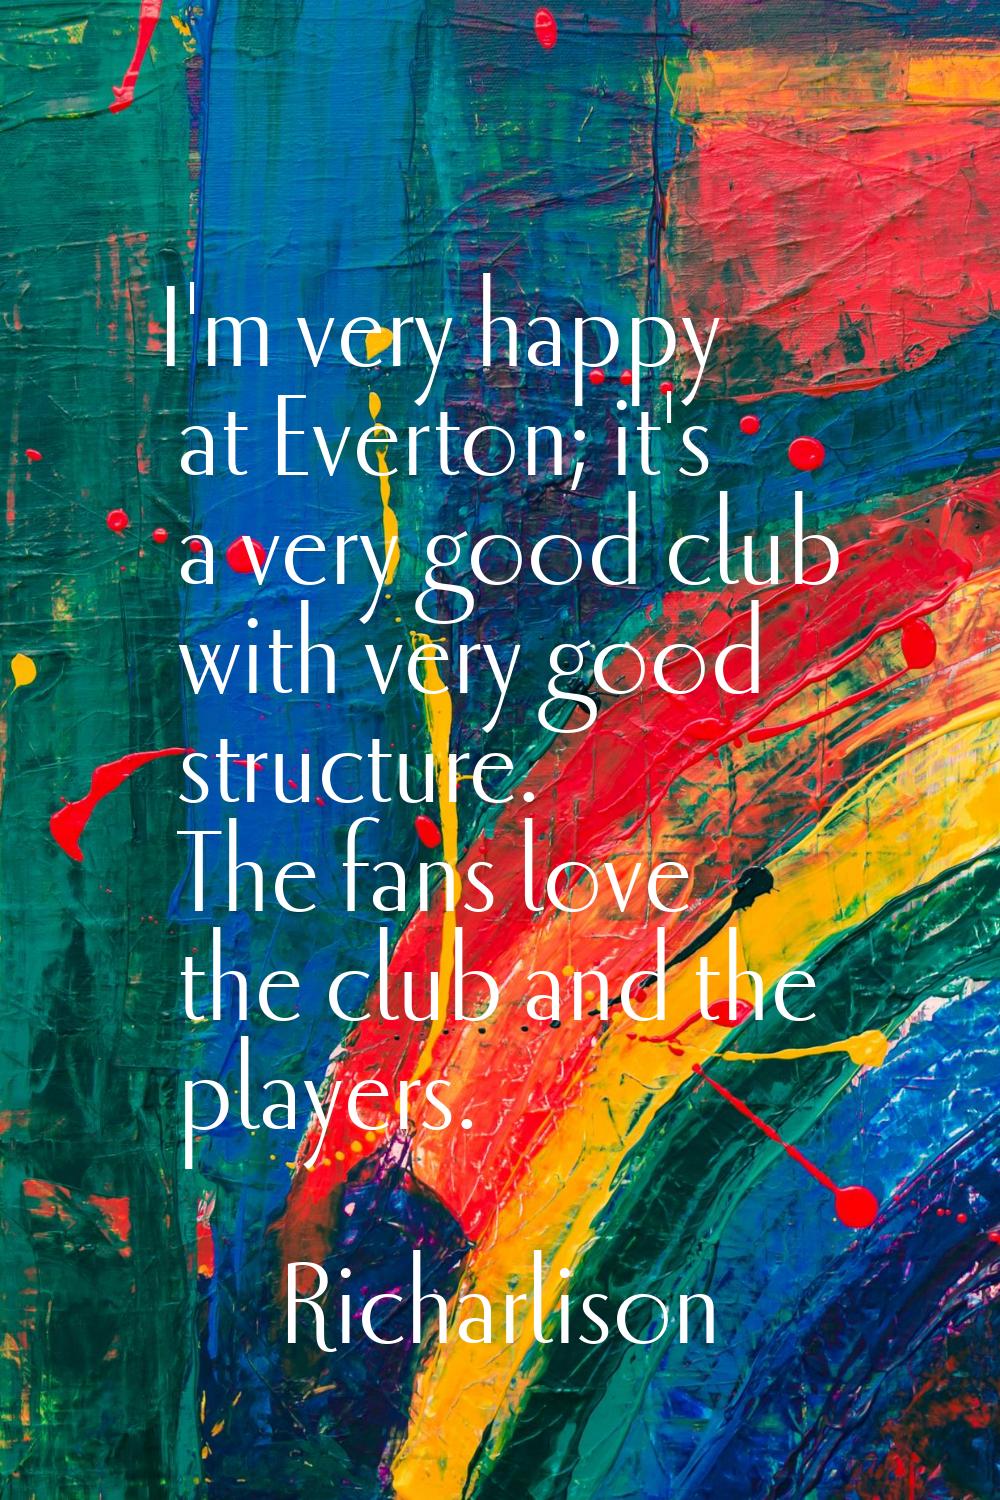 I'm very happy at Everton; it's a very good club with very good structure. The fans love the club a